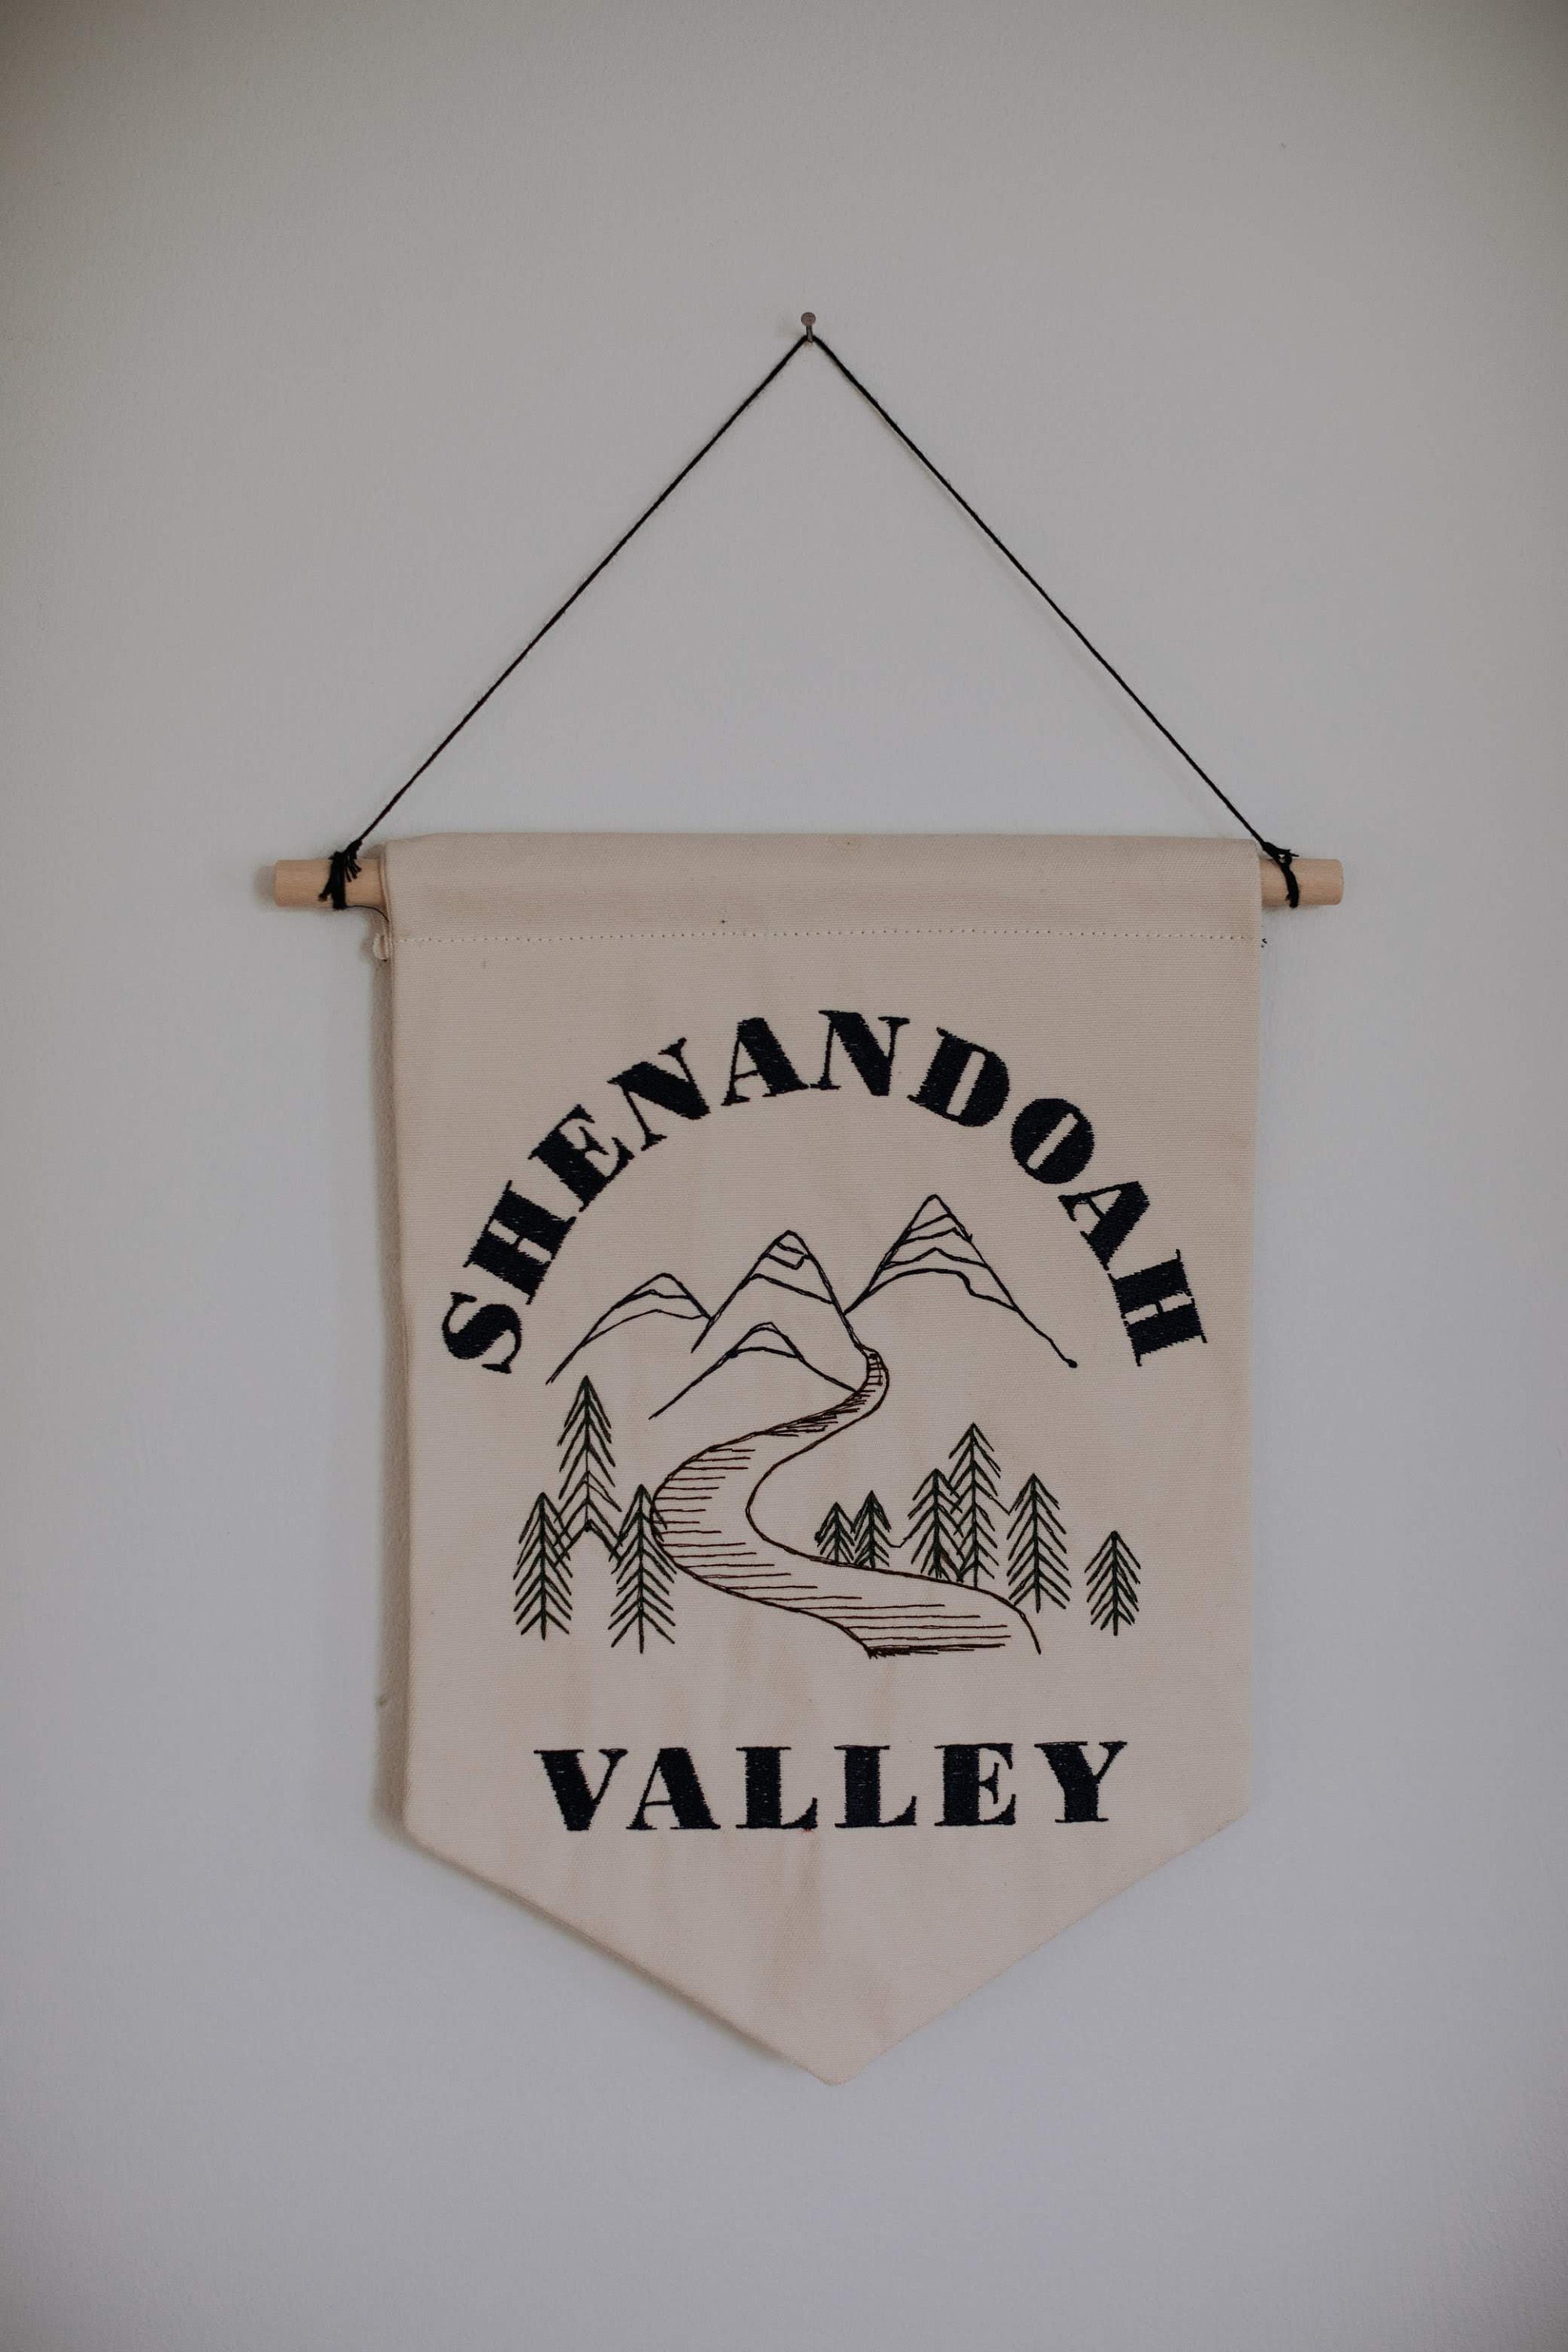 Shenandoah Valley Embroidered Banner Wall Hanging Pendant Home | Etsy